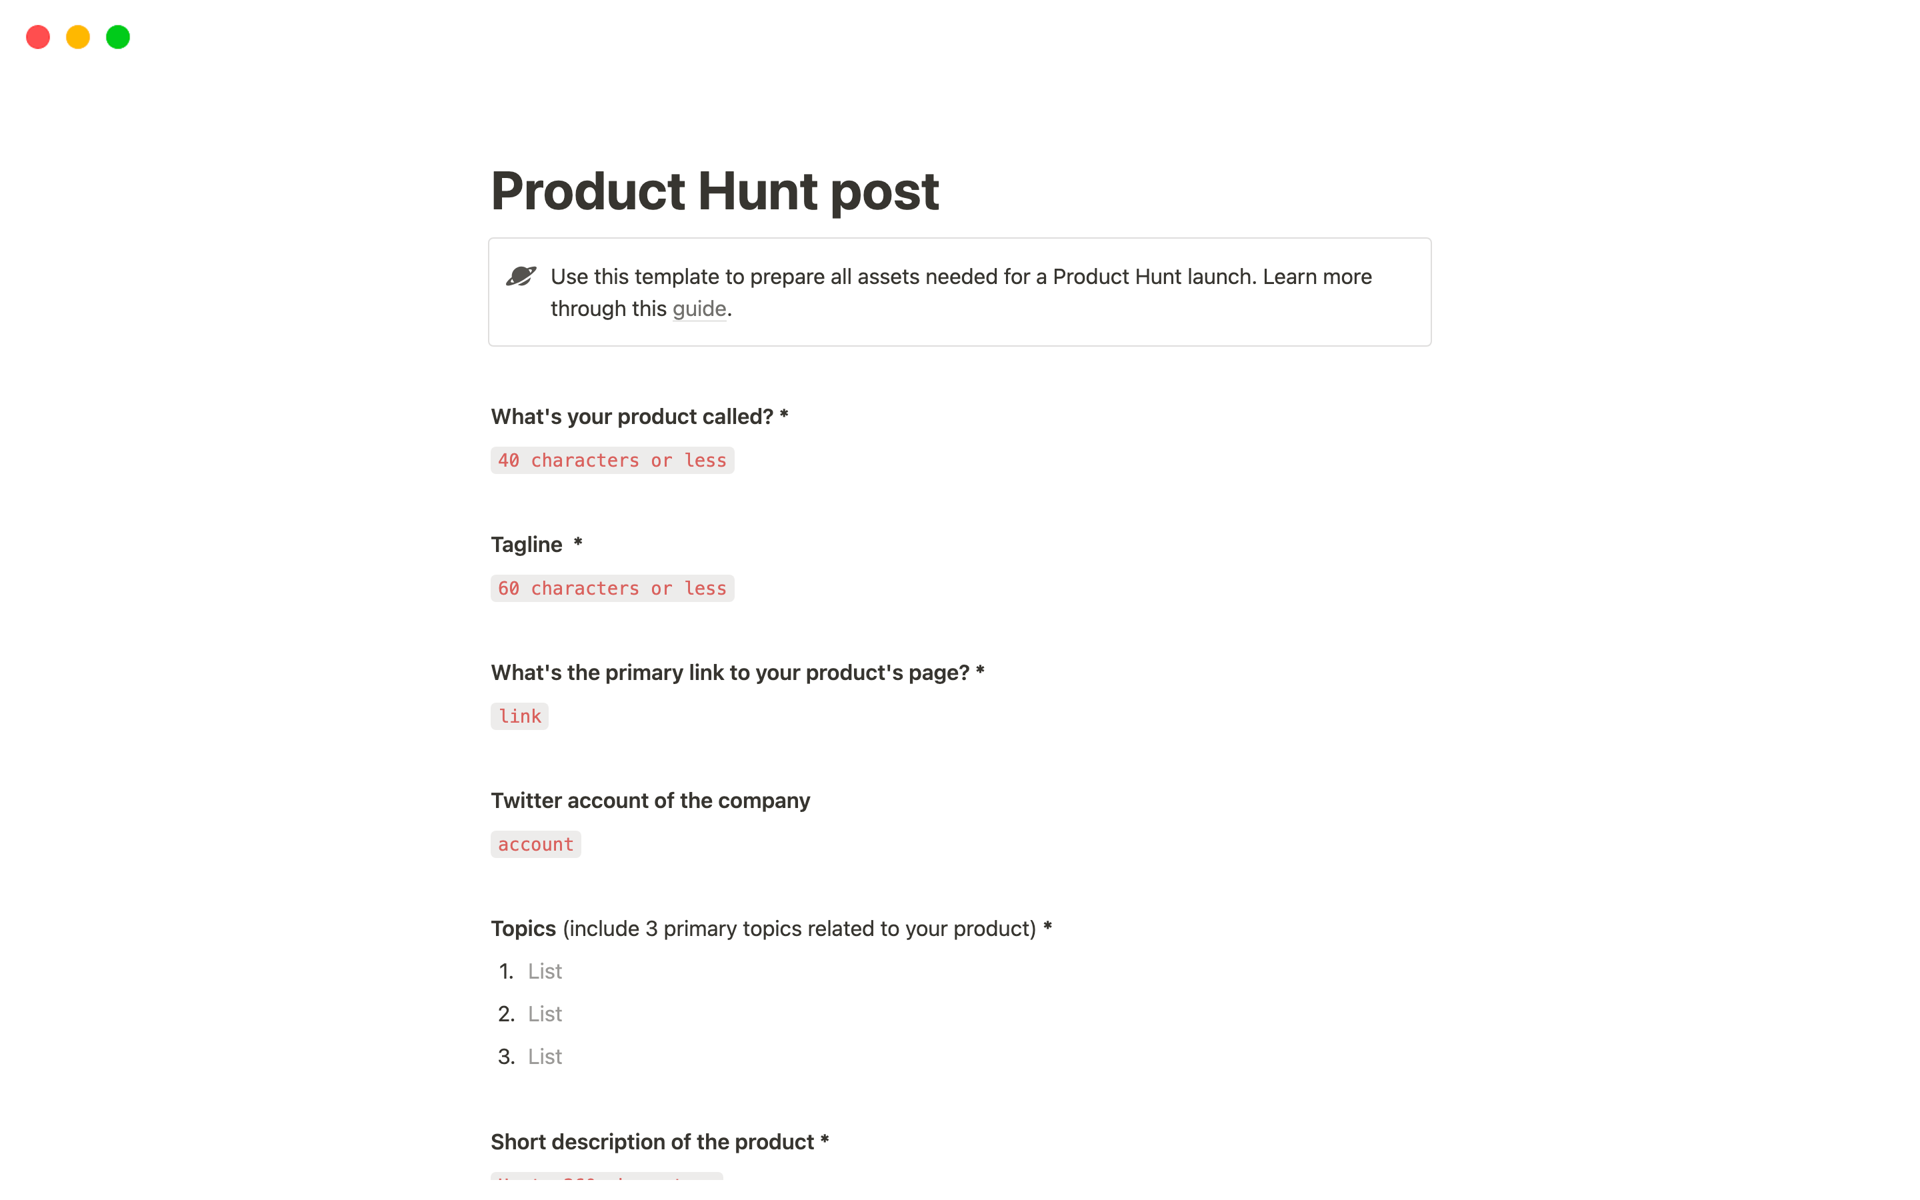 Use this template to prepare all assets needed for a Product Hunt launch